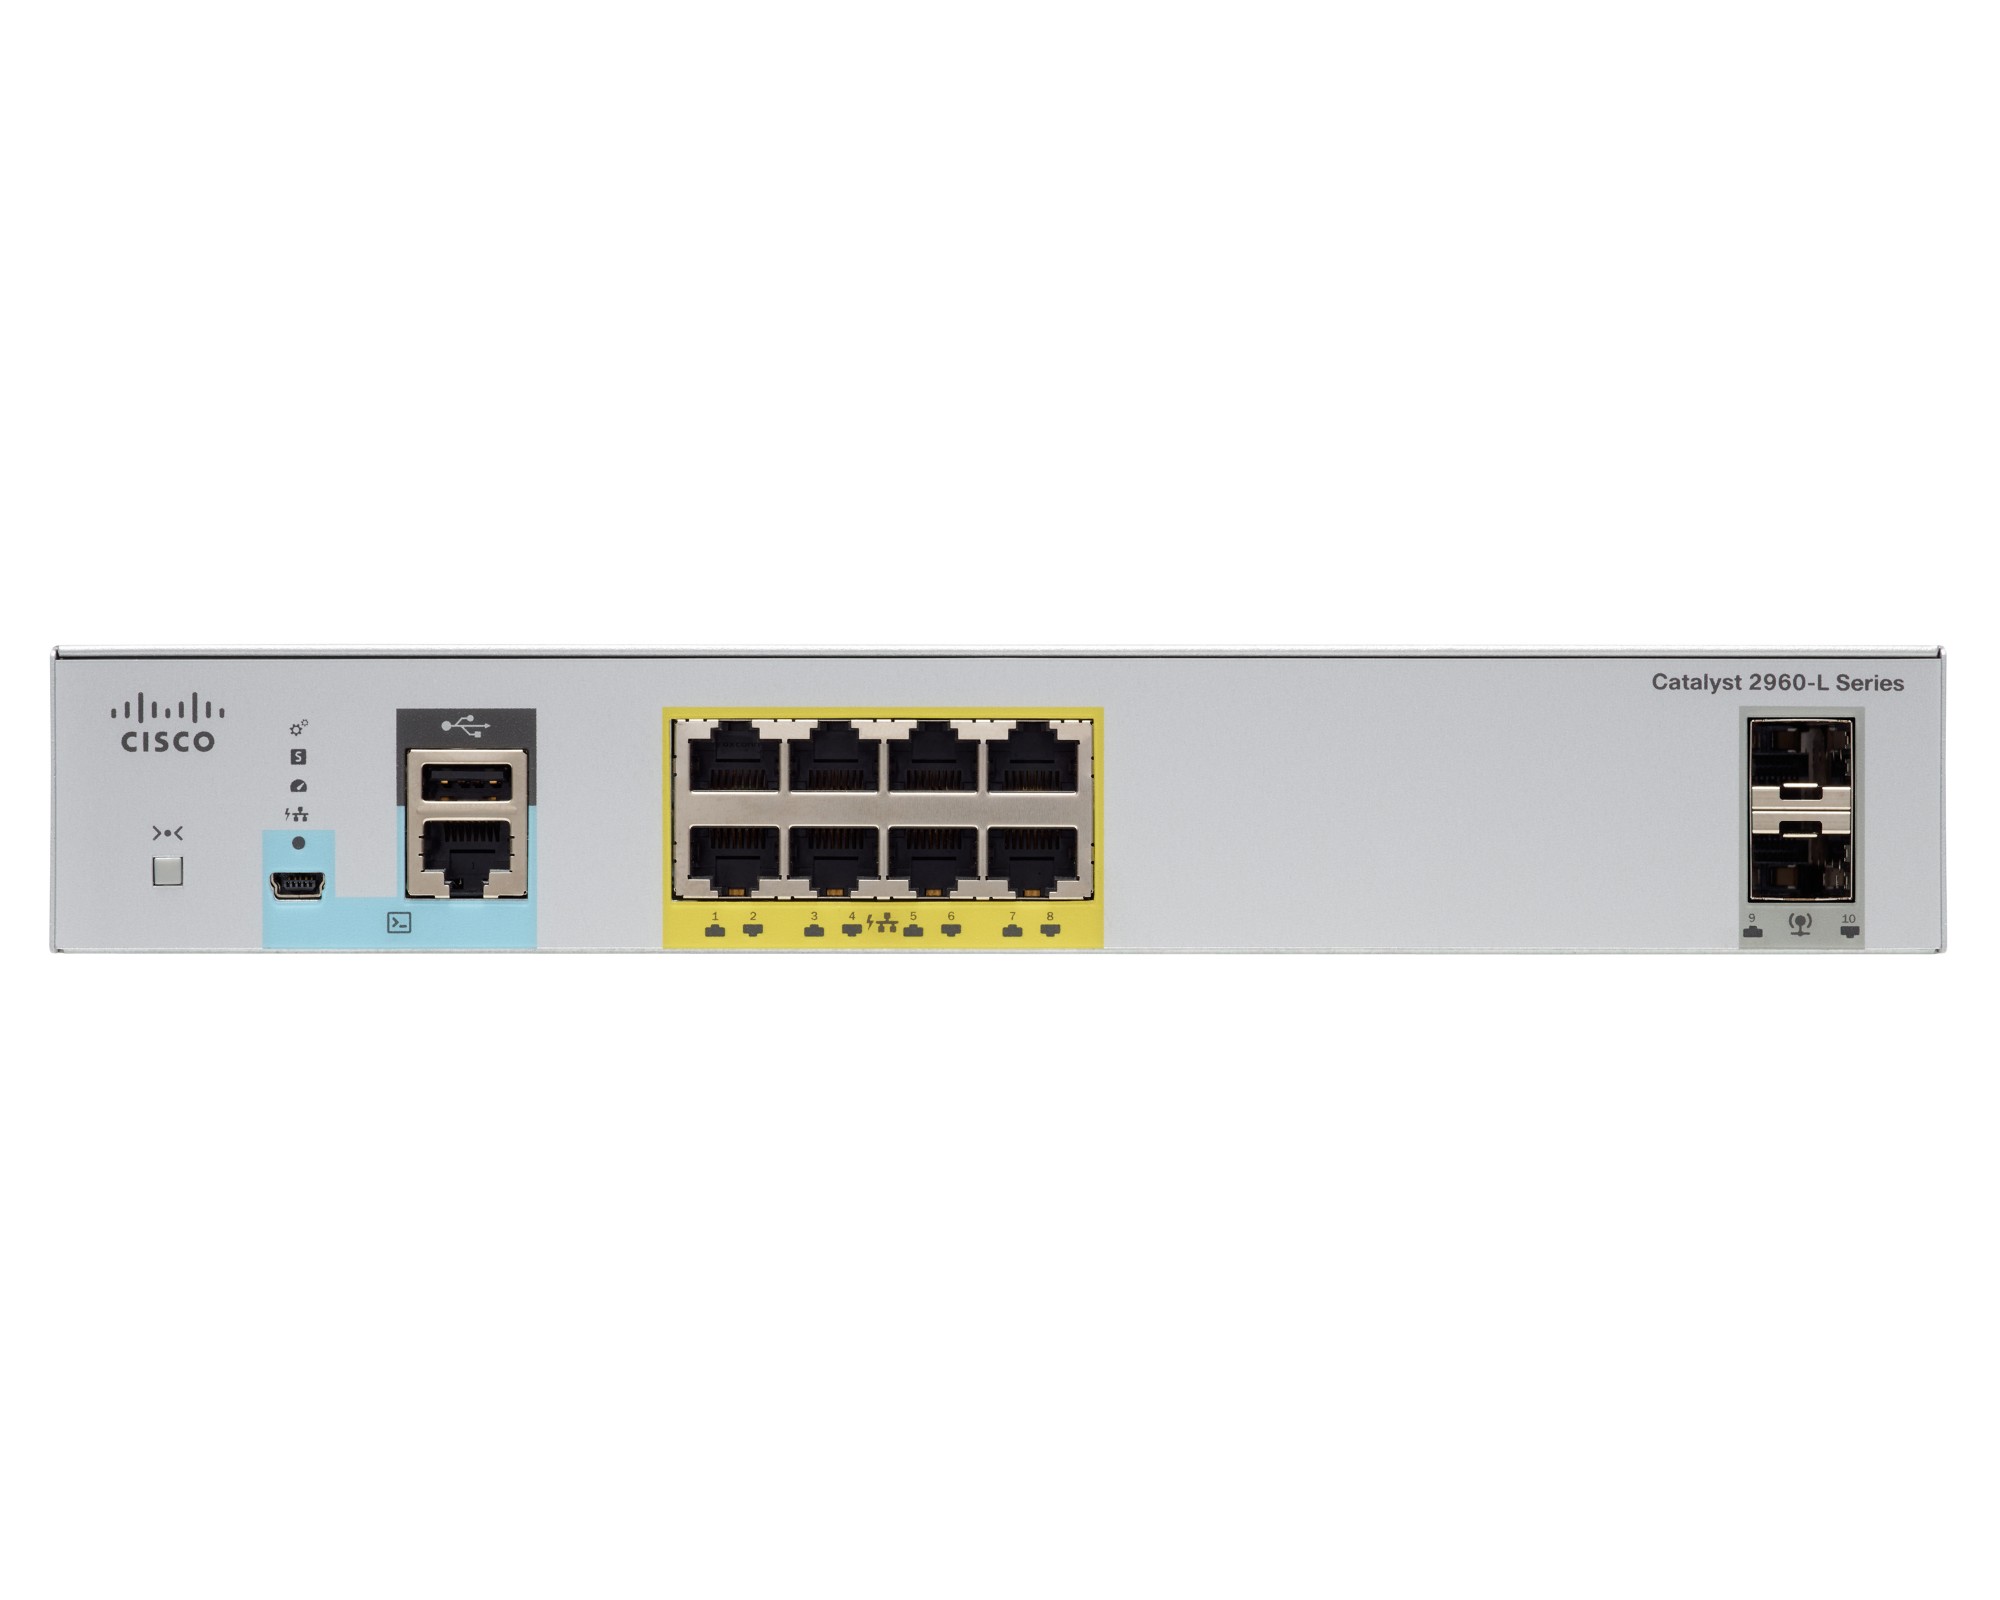 Cisco 8Port PoE Gigabit Layer 2 Managed Switch with Dual SFP